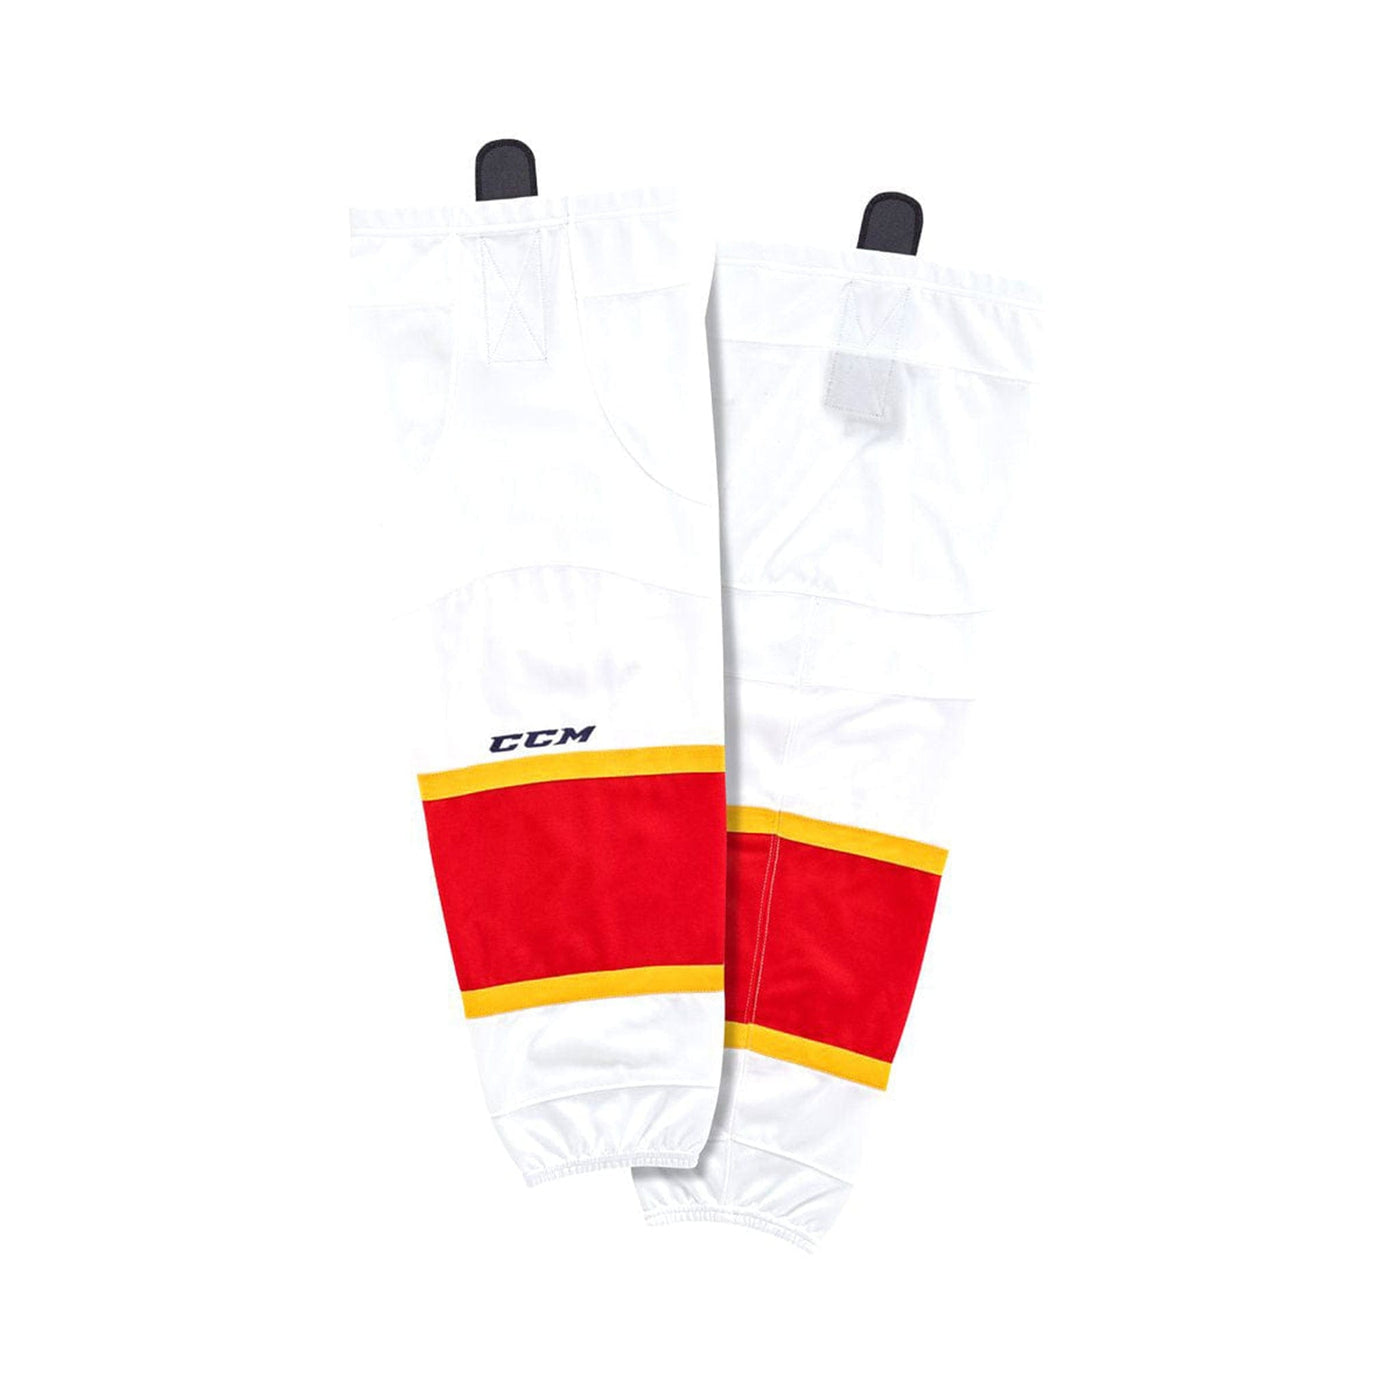 Florida Panthers Away CCM Quicklite 8000 Hockey Socks - The Hockey Shop Source For Sports